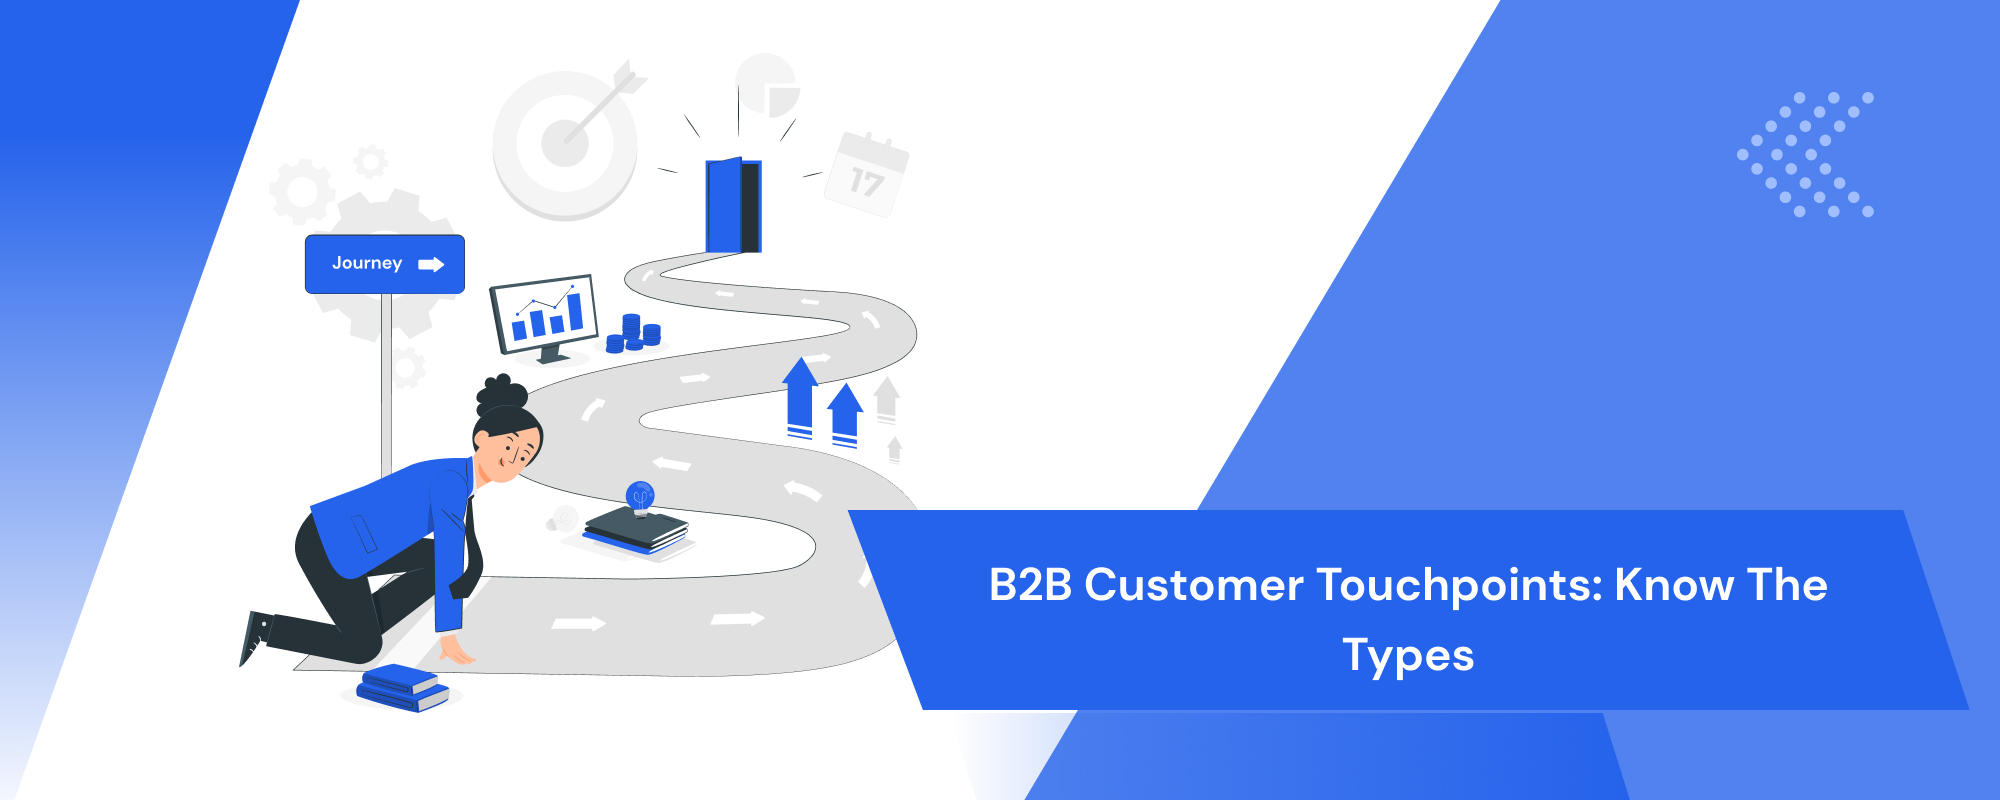 B2B Customer Touchpoints: Know the Types